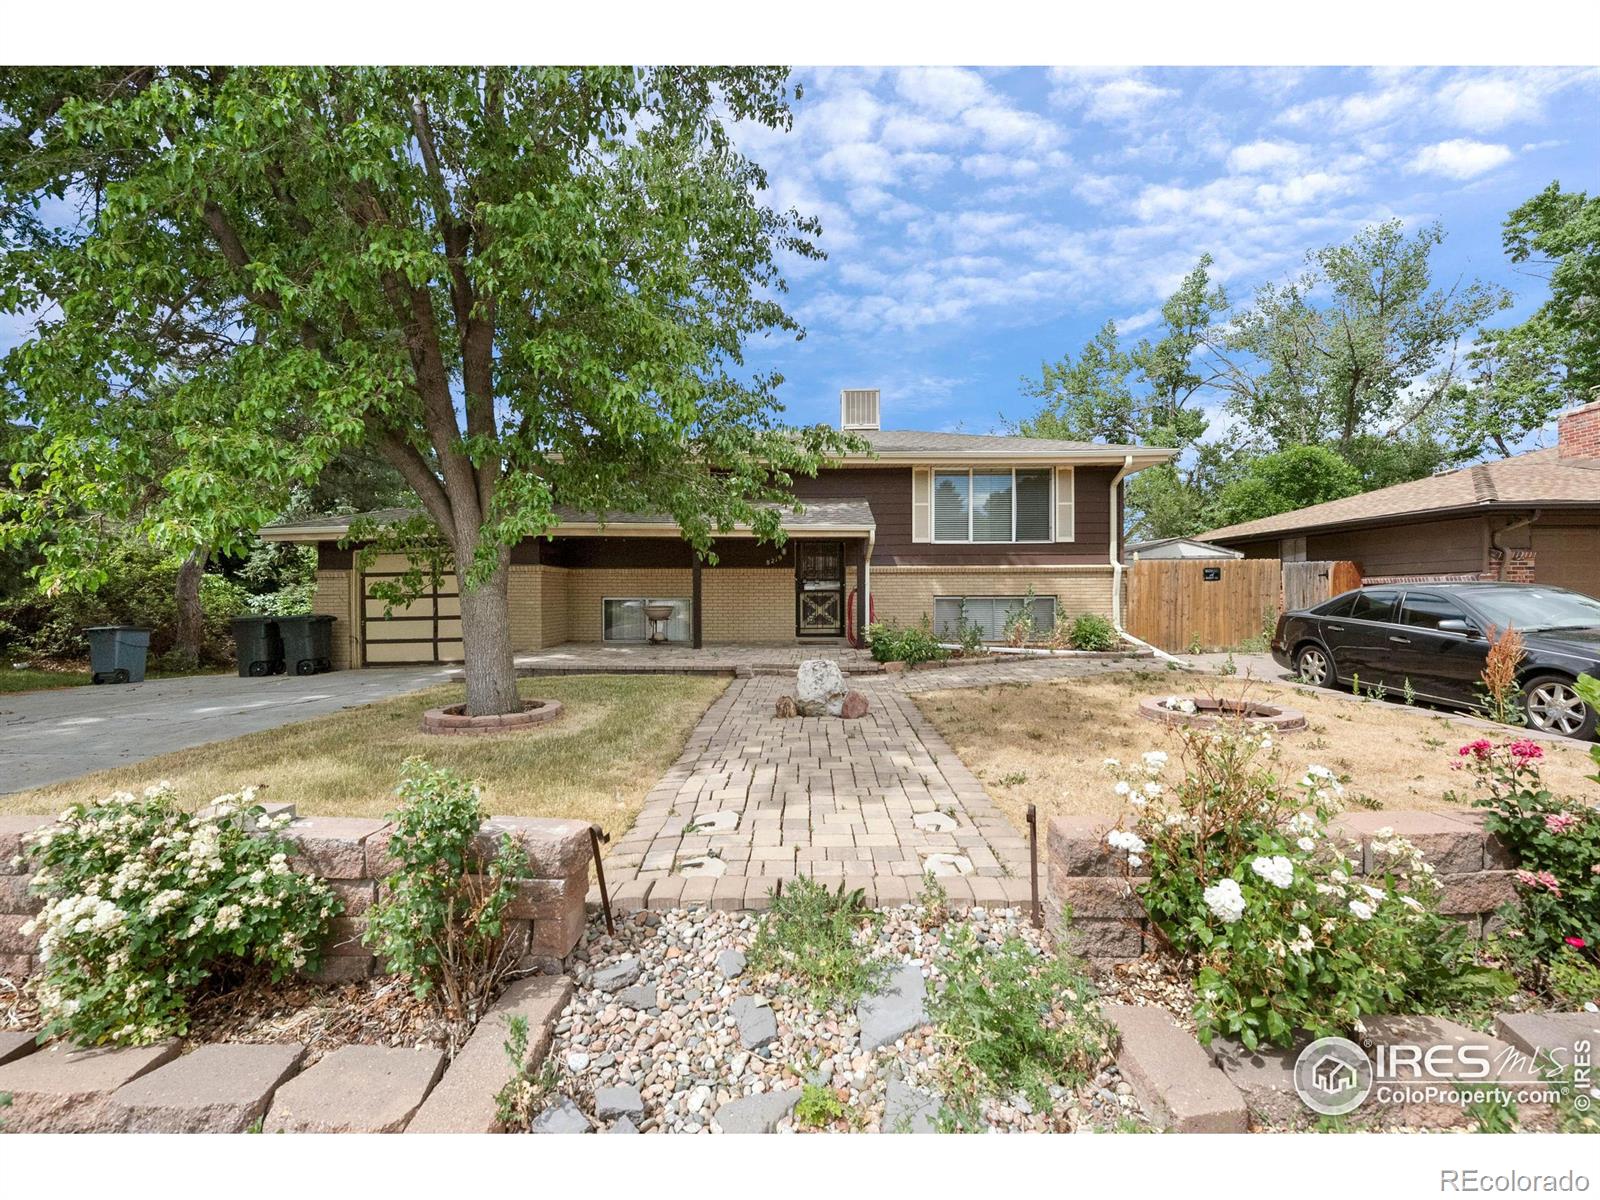 8219  Chase Drive, arvada MLS: 4567891014257 Beds: 4 Baths: 2 Price: $400,000